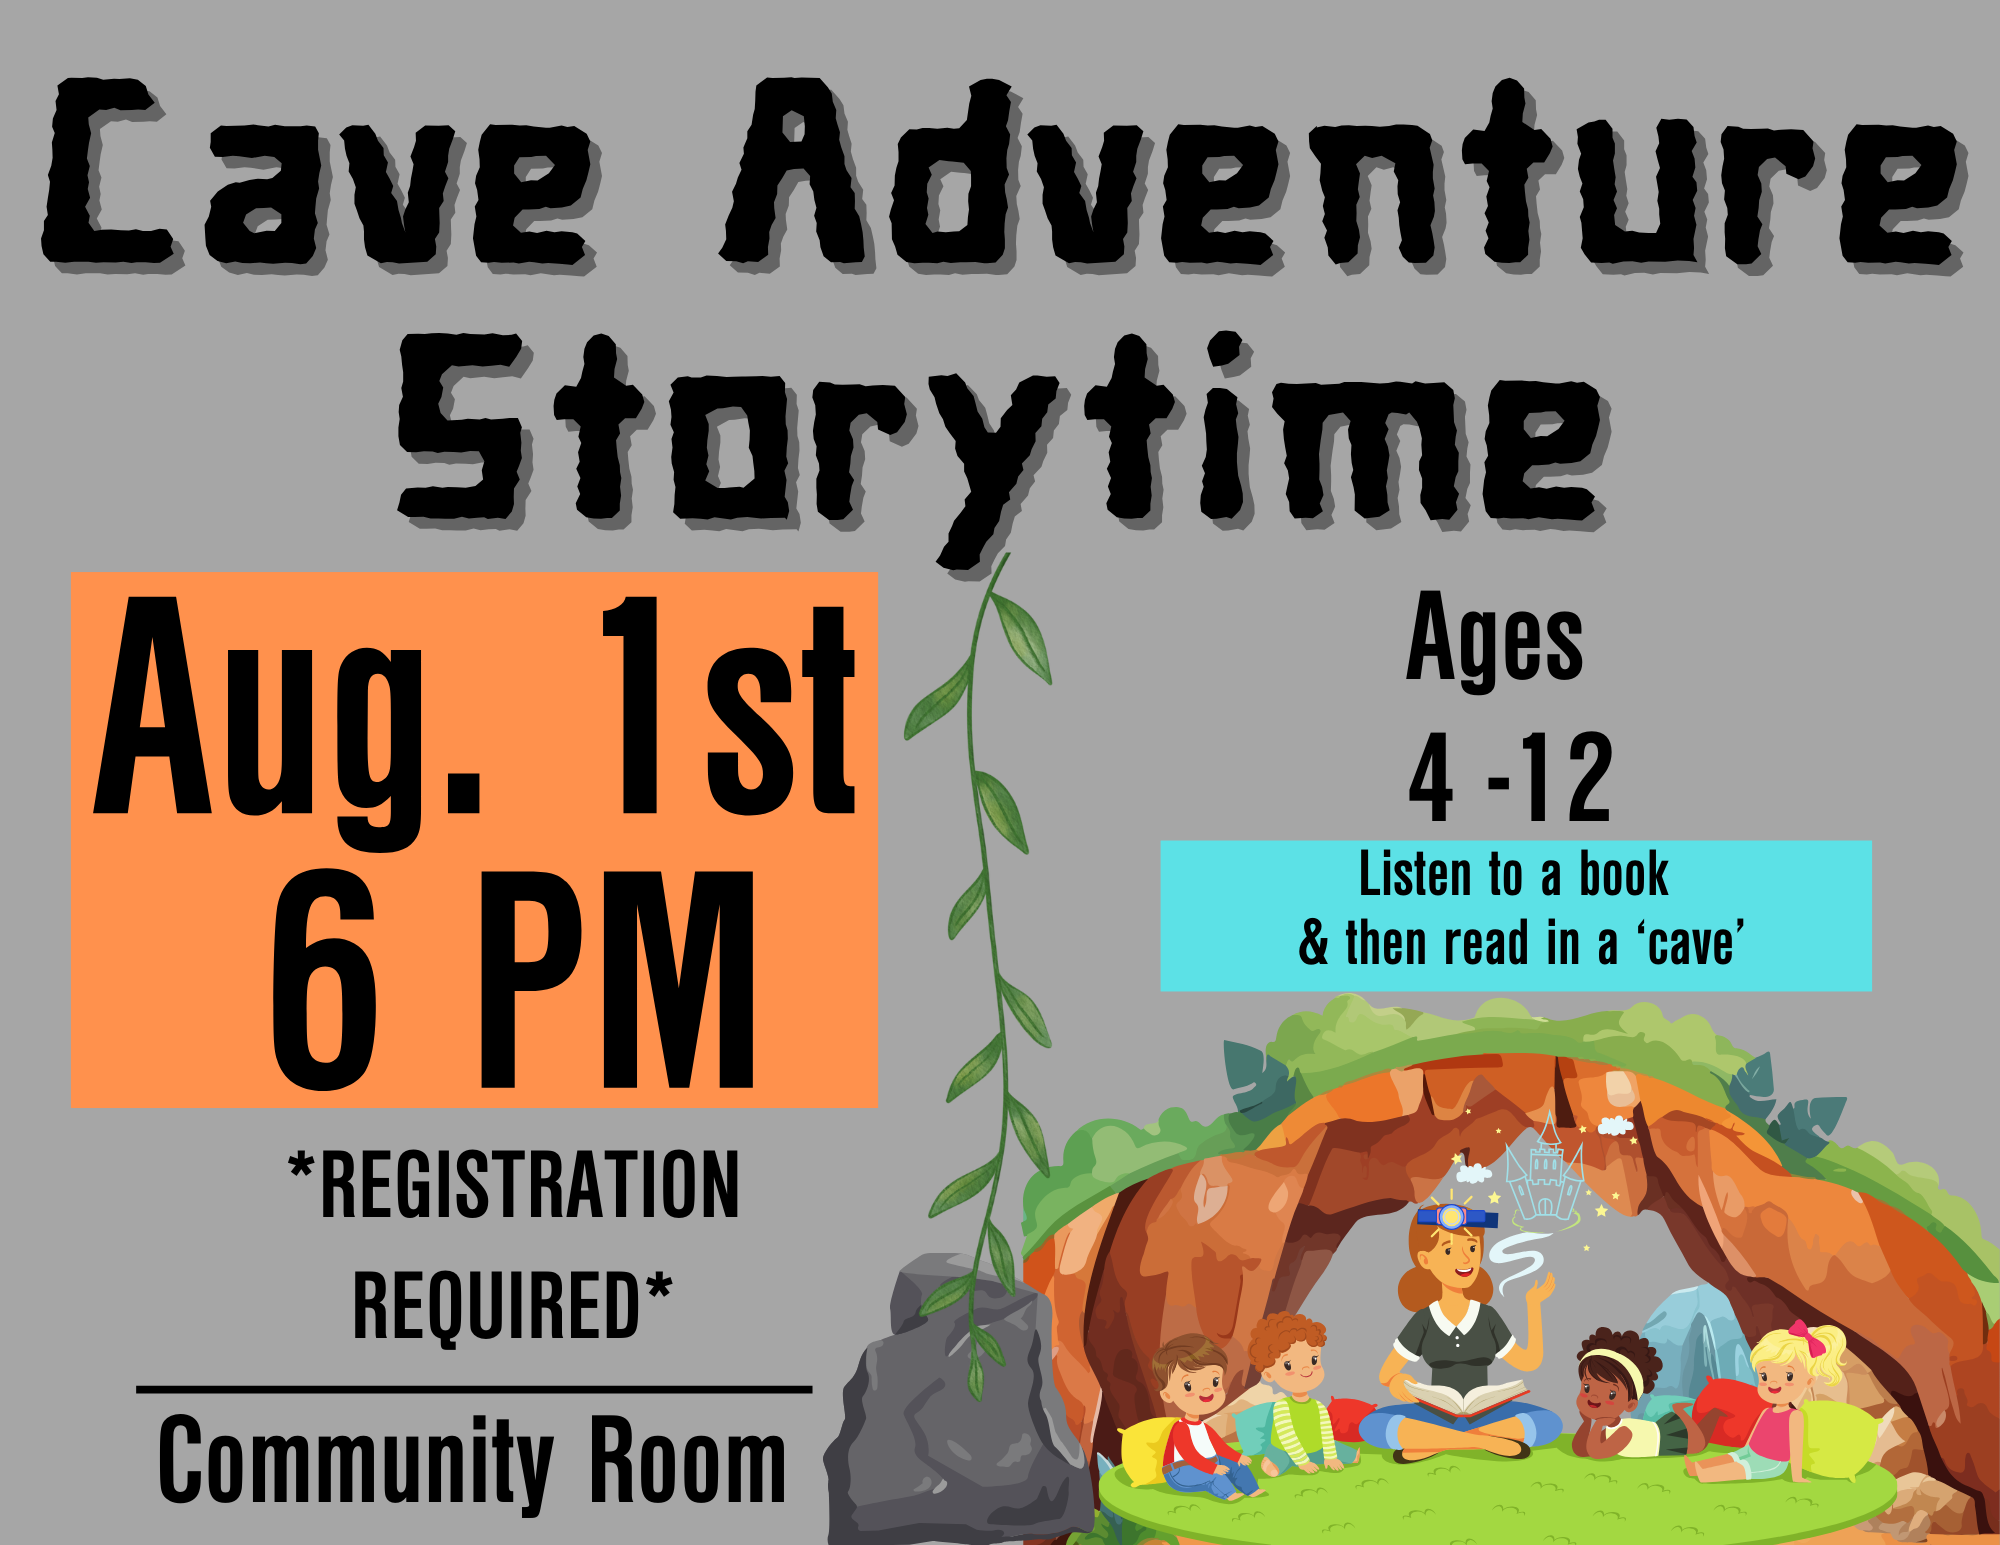 Cave Adventure Storytime Aug. 1st 6 PM *REGISTRATION REQUIRED* Community Room Ages 4-12. Hear a story & then read in a "Cave"